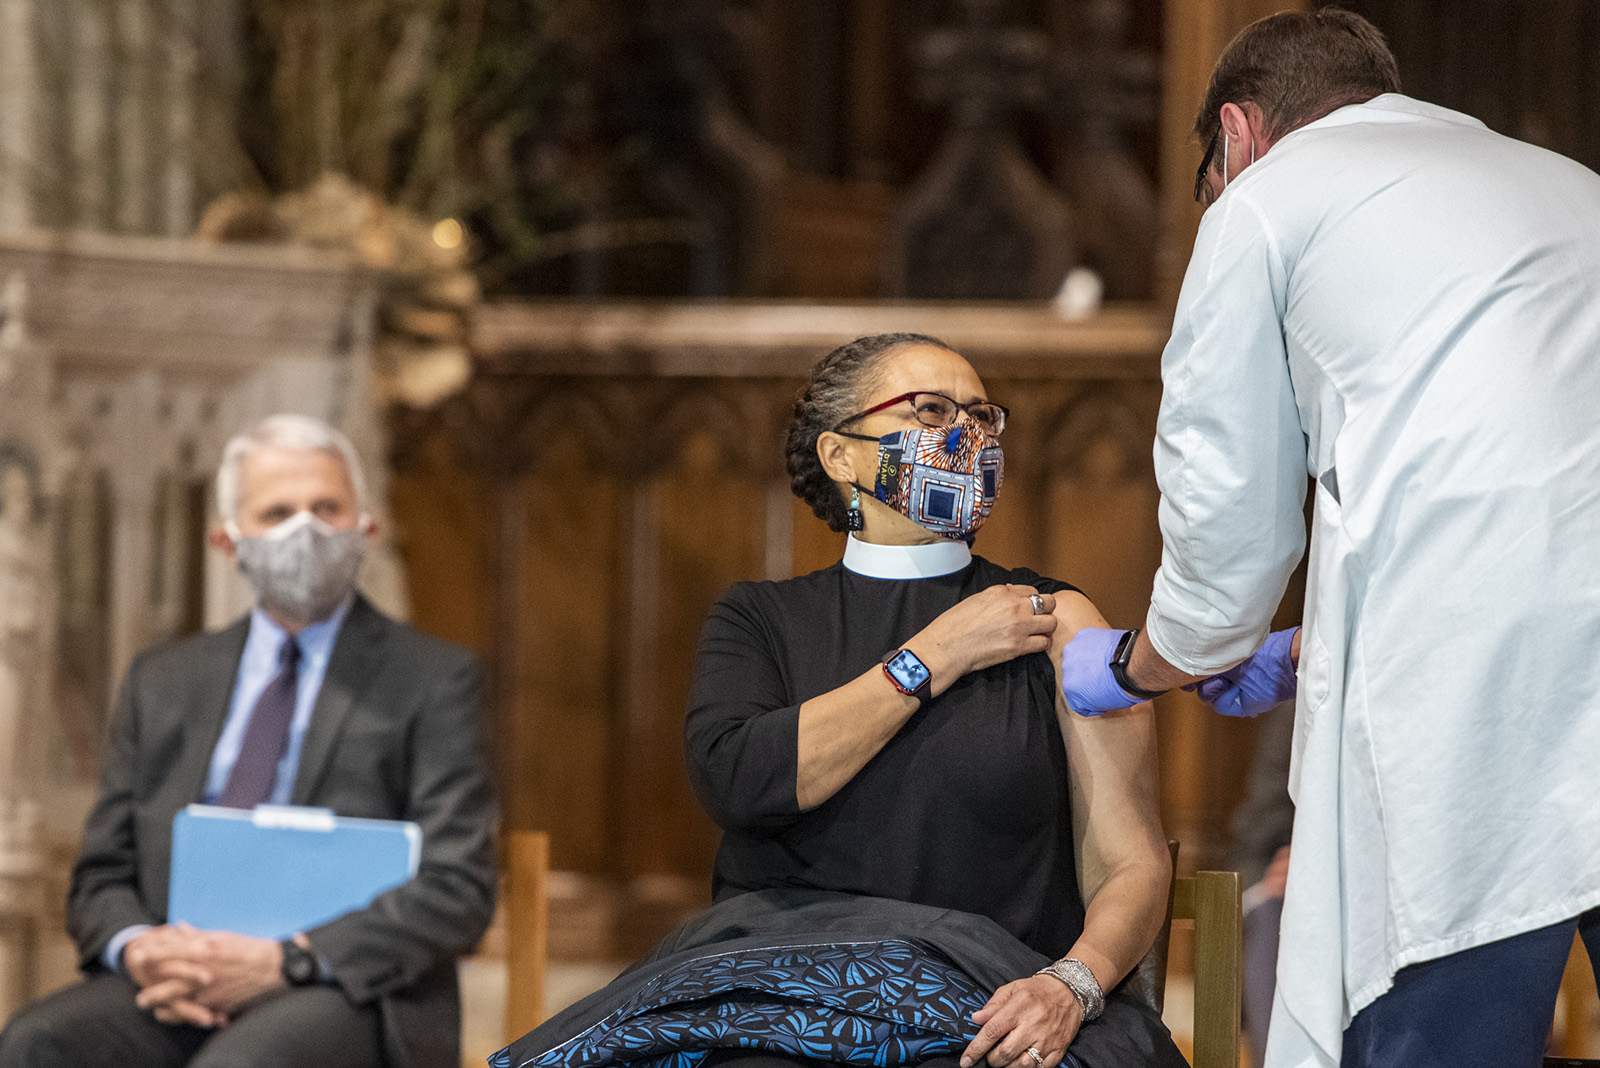 The Rev. Patricia Hailes Fears, pastor of the Fellowship Baptist Church in Washington, receives the Johnson & Johnson COVID-19 vaccine during a gathering of a group of interfaith clergy members, community leaders and officials at the Washington National Cathedral, to encourage faith communities to get the COVID-19 vaccine, Tuesday, March 16, 2021, in Washington. Photo by Danielle E. Thomas/Washington National Cathedral